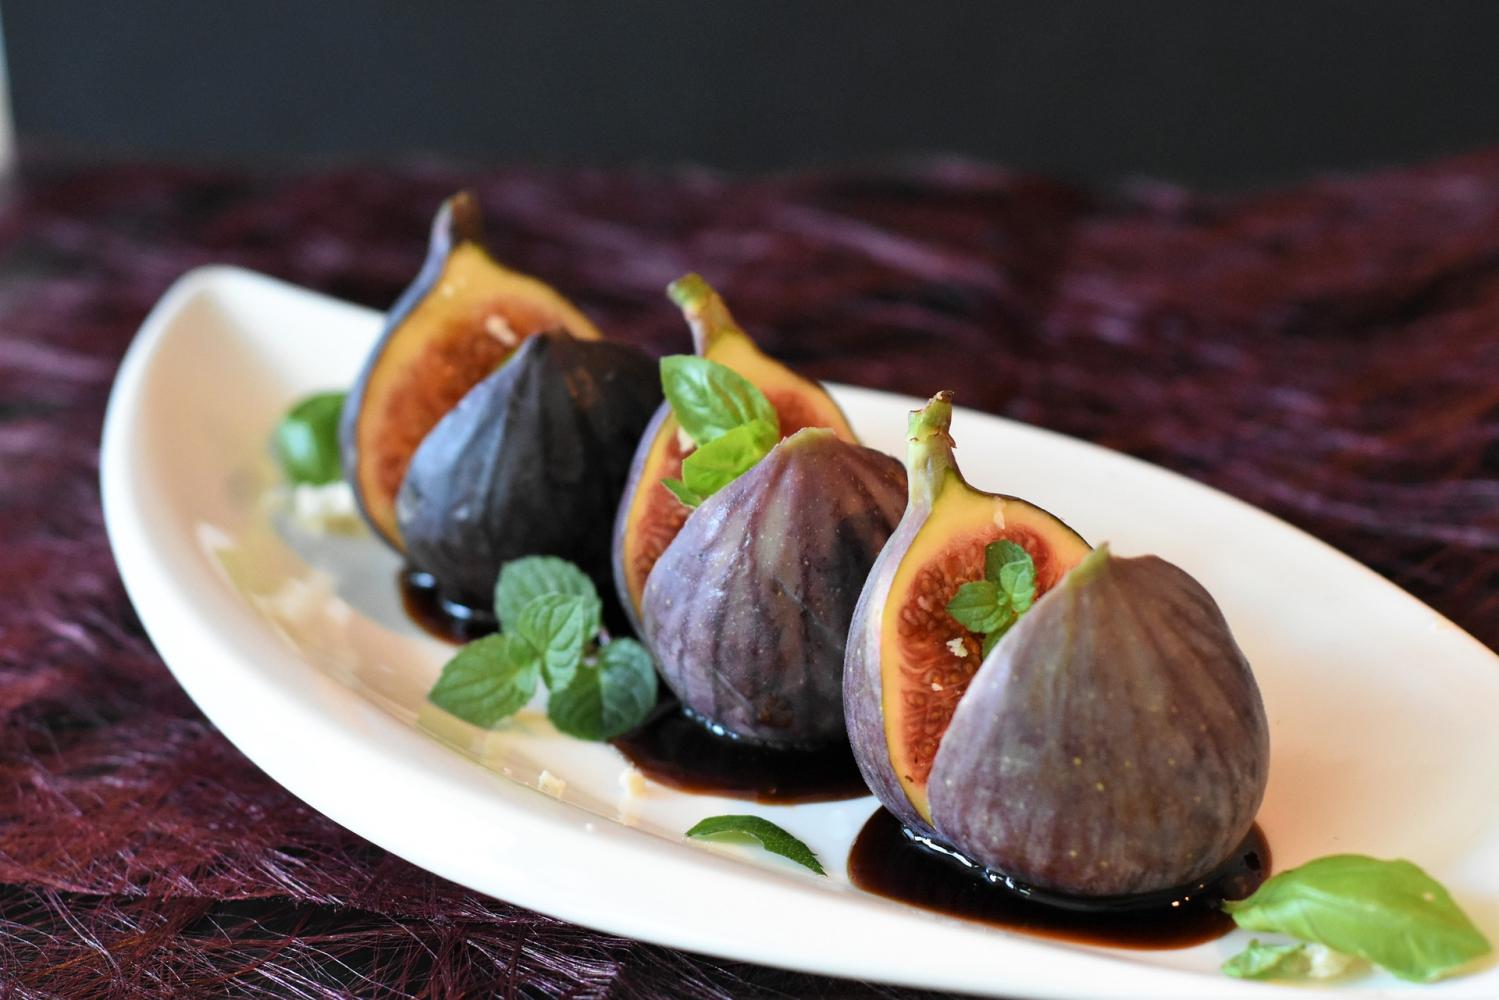 Figs - a versatile fruit with natural sweetness